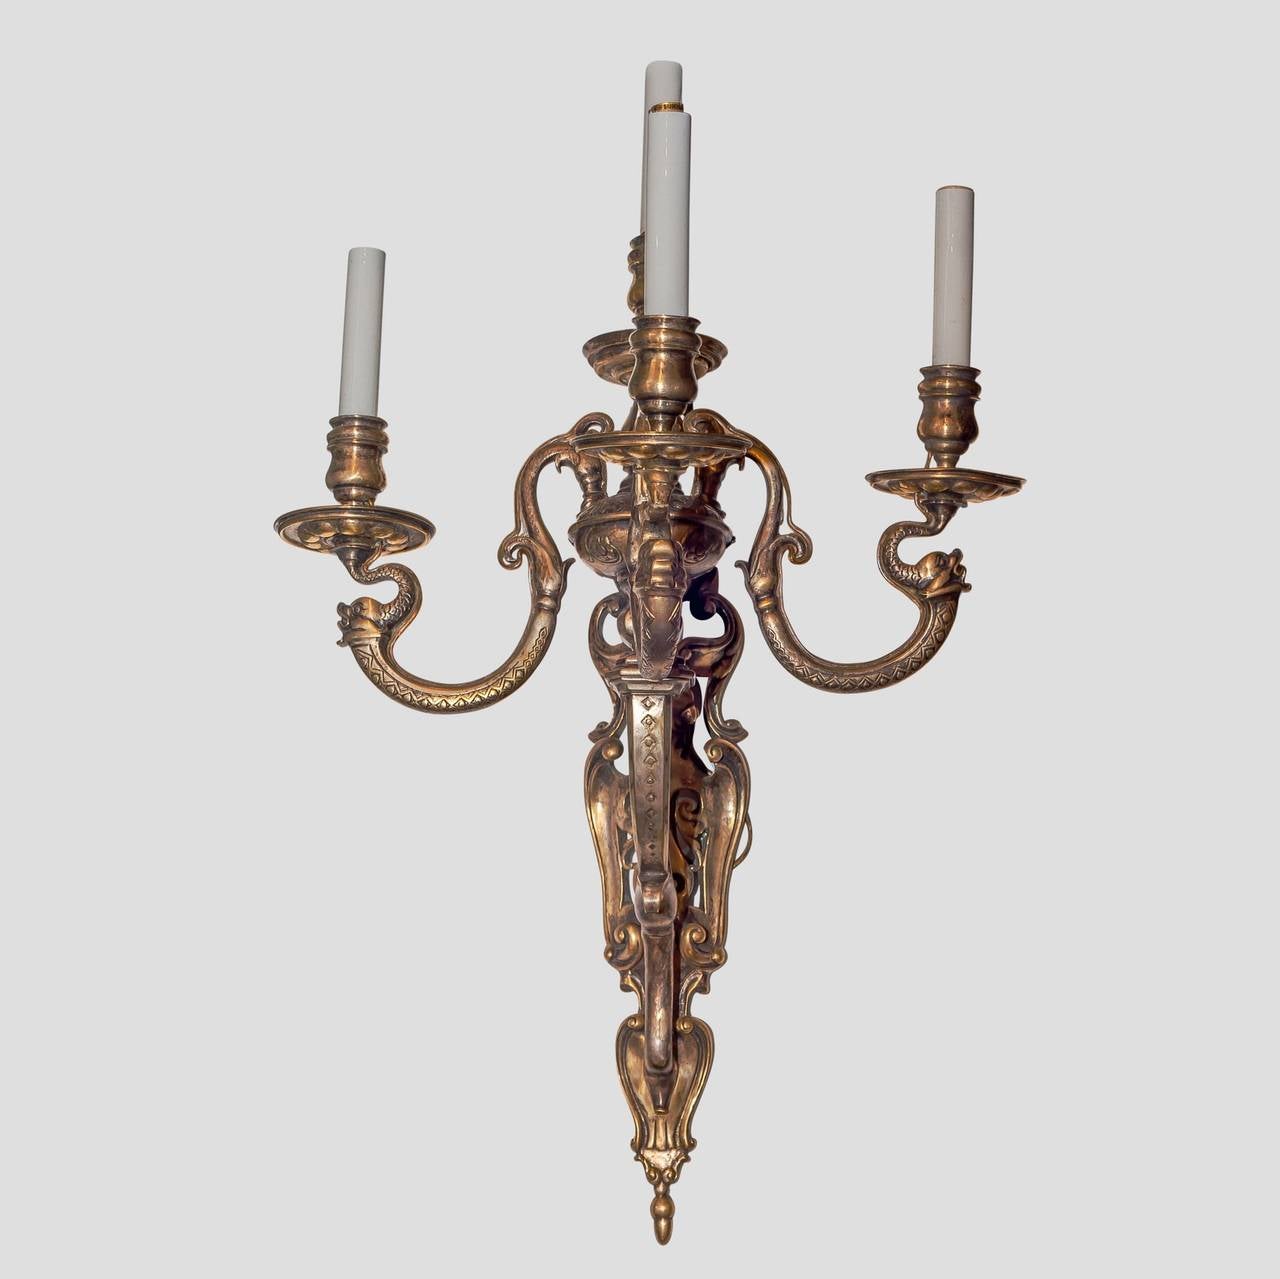 Pair of Antique Silvered Bronze Three-Arm Wall Light Sconces in Moorish Style
Stock Number: L271